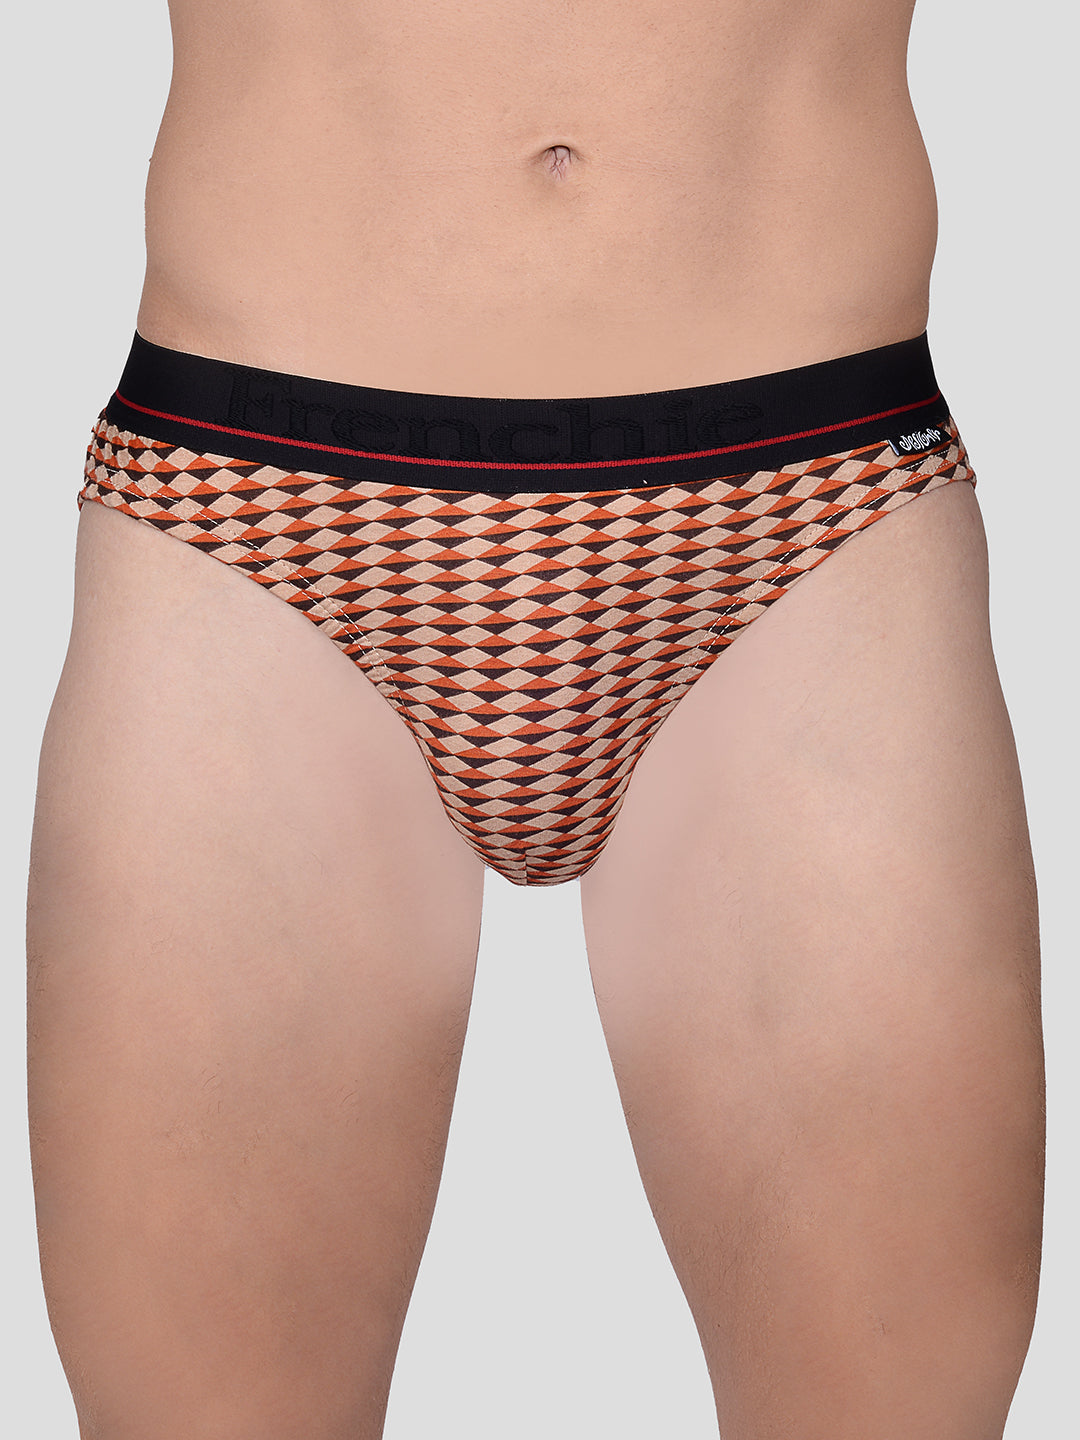 Poomex French Brief (Outer Elastic), Buy Poomex French Brief (outer  Elastic) Online, Innerwear online shopping